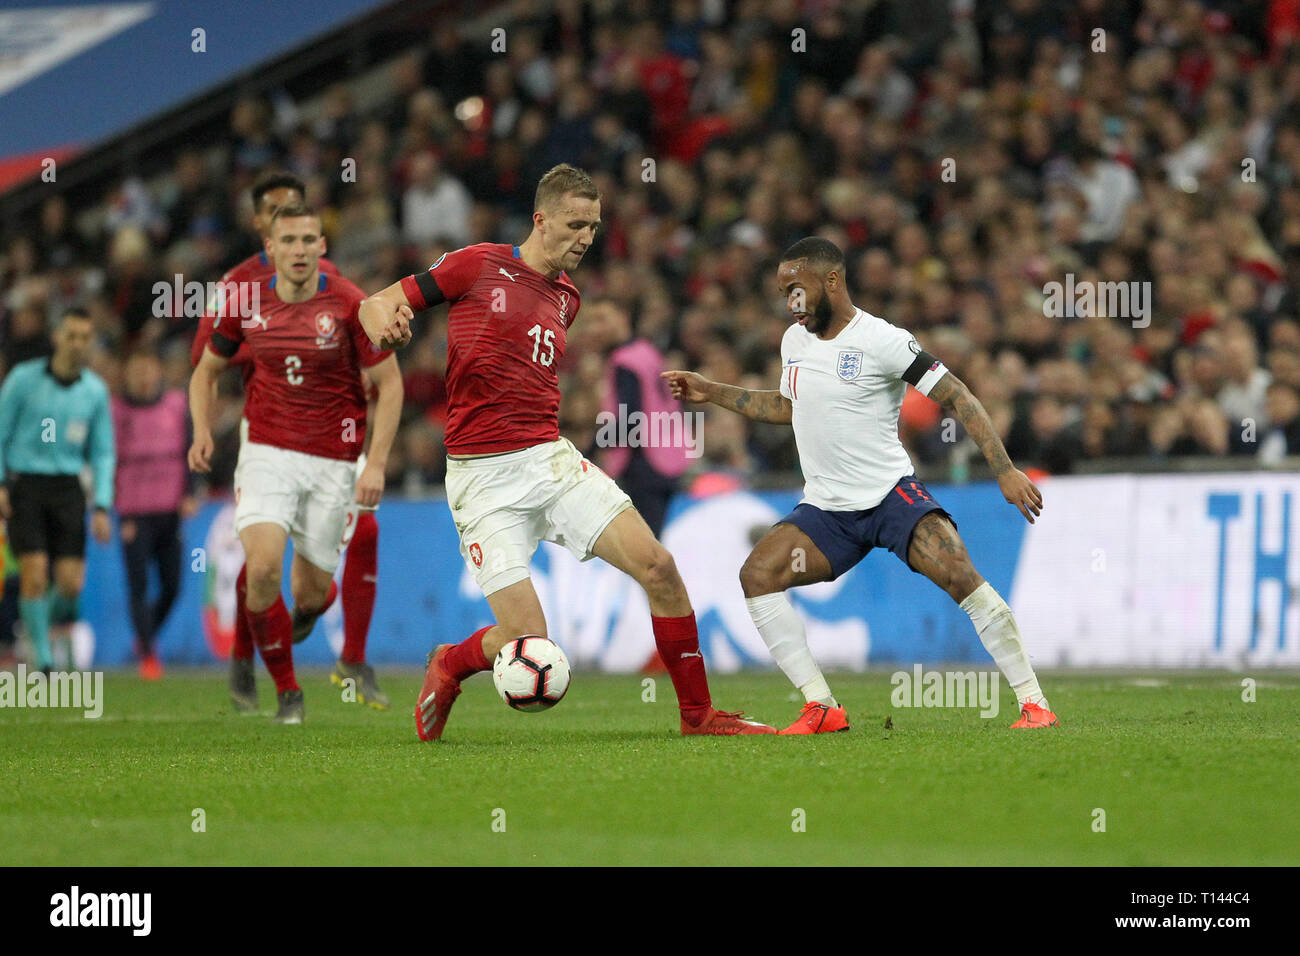 London, UK. 22nd Mar, 2019. Tomas Soucek of Czech Republic gets the better of Raheem Sterling of England during the UEFA Euro 2020 Qualifying Group A match between England and Czech Republic at Wembley Stadium on March 22nd 2019 in London, England. (Photo by Mick Kearns/phcimages.com) Credit: PHC Images/Alamy Live News Stock Photo